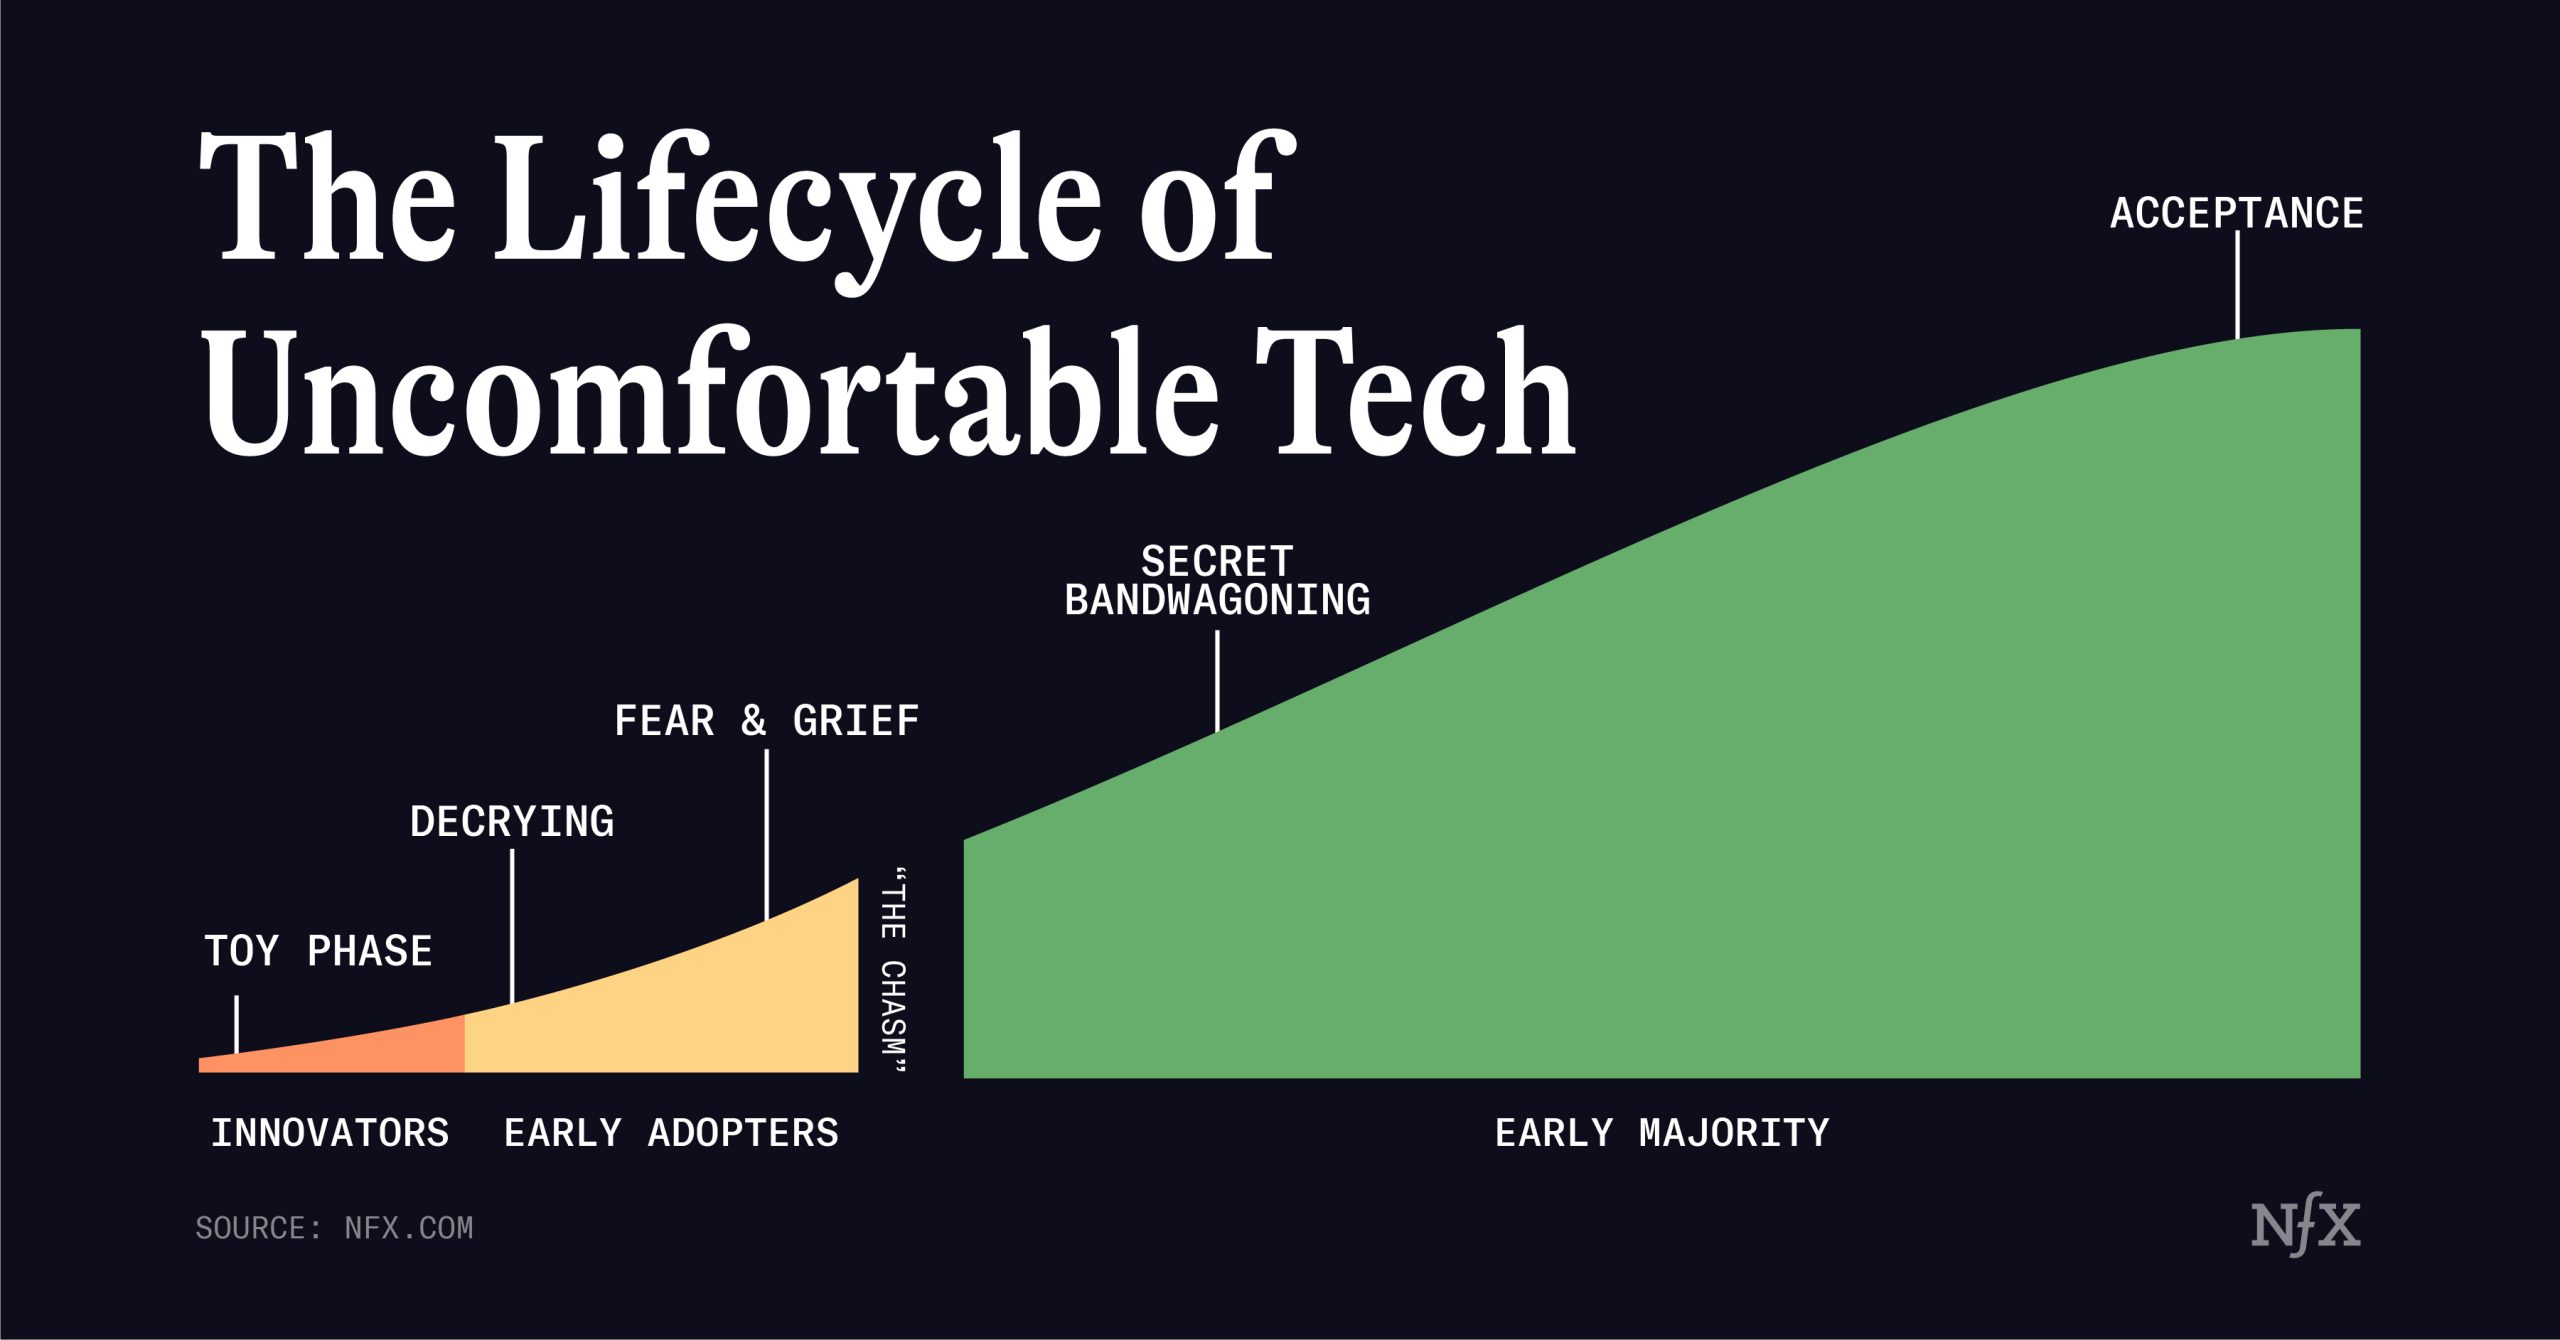 The Lifecycle of Uncomfortable Tech